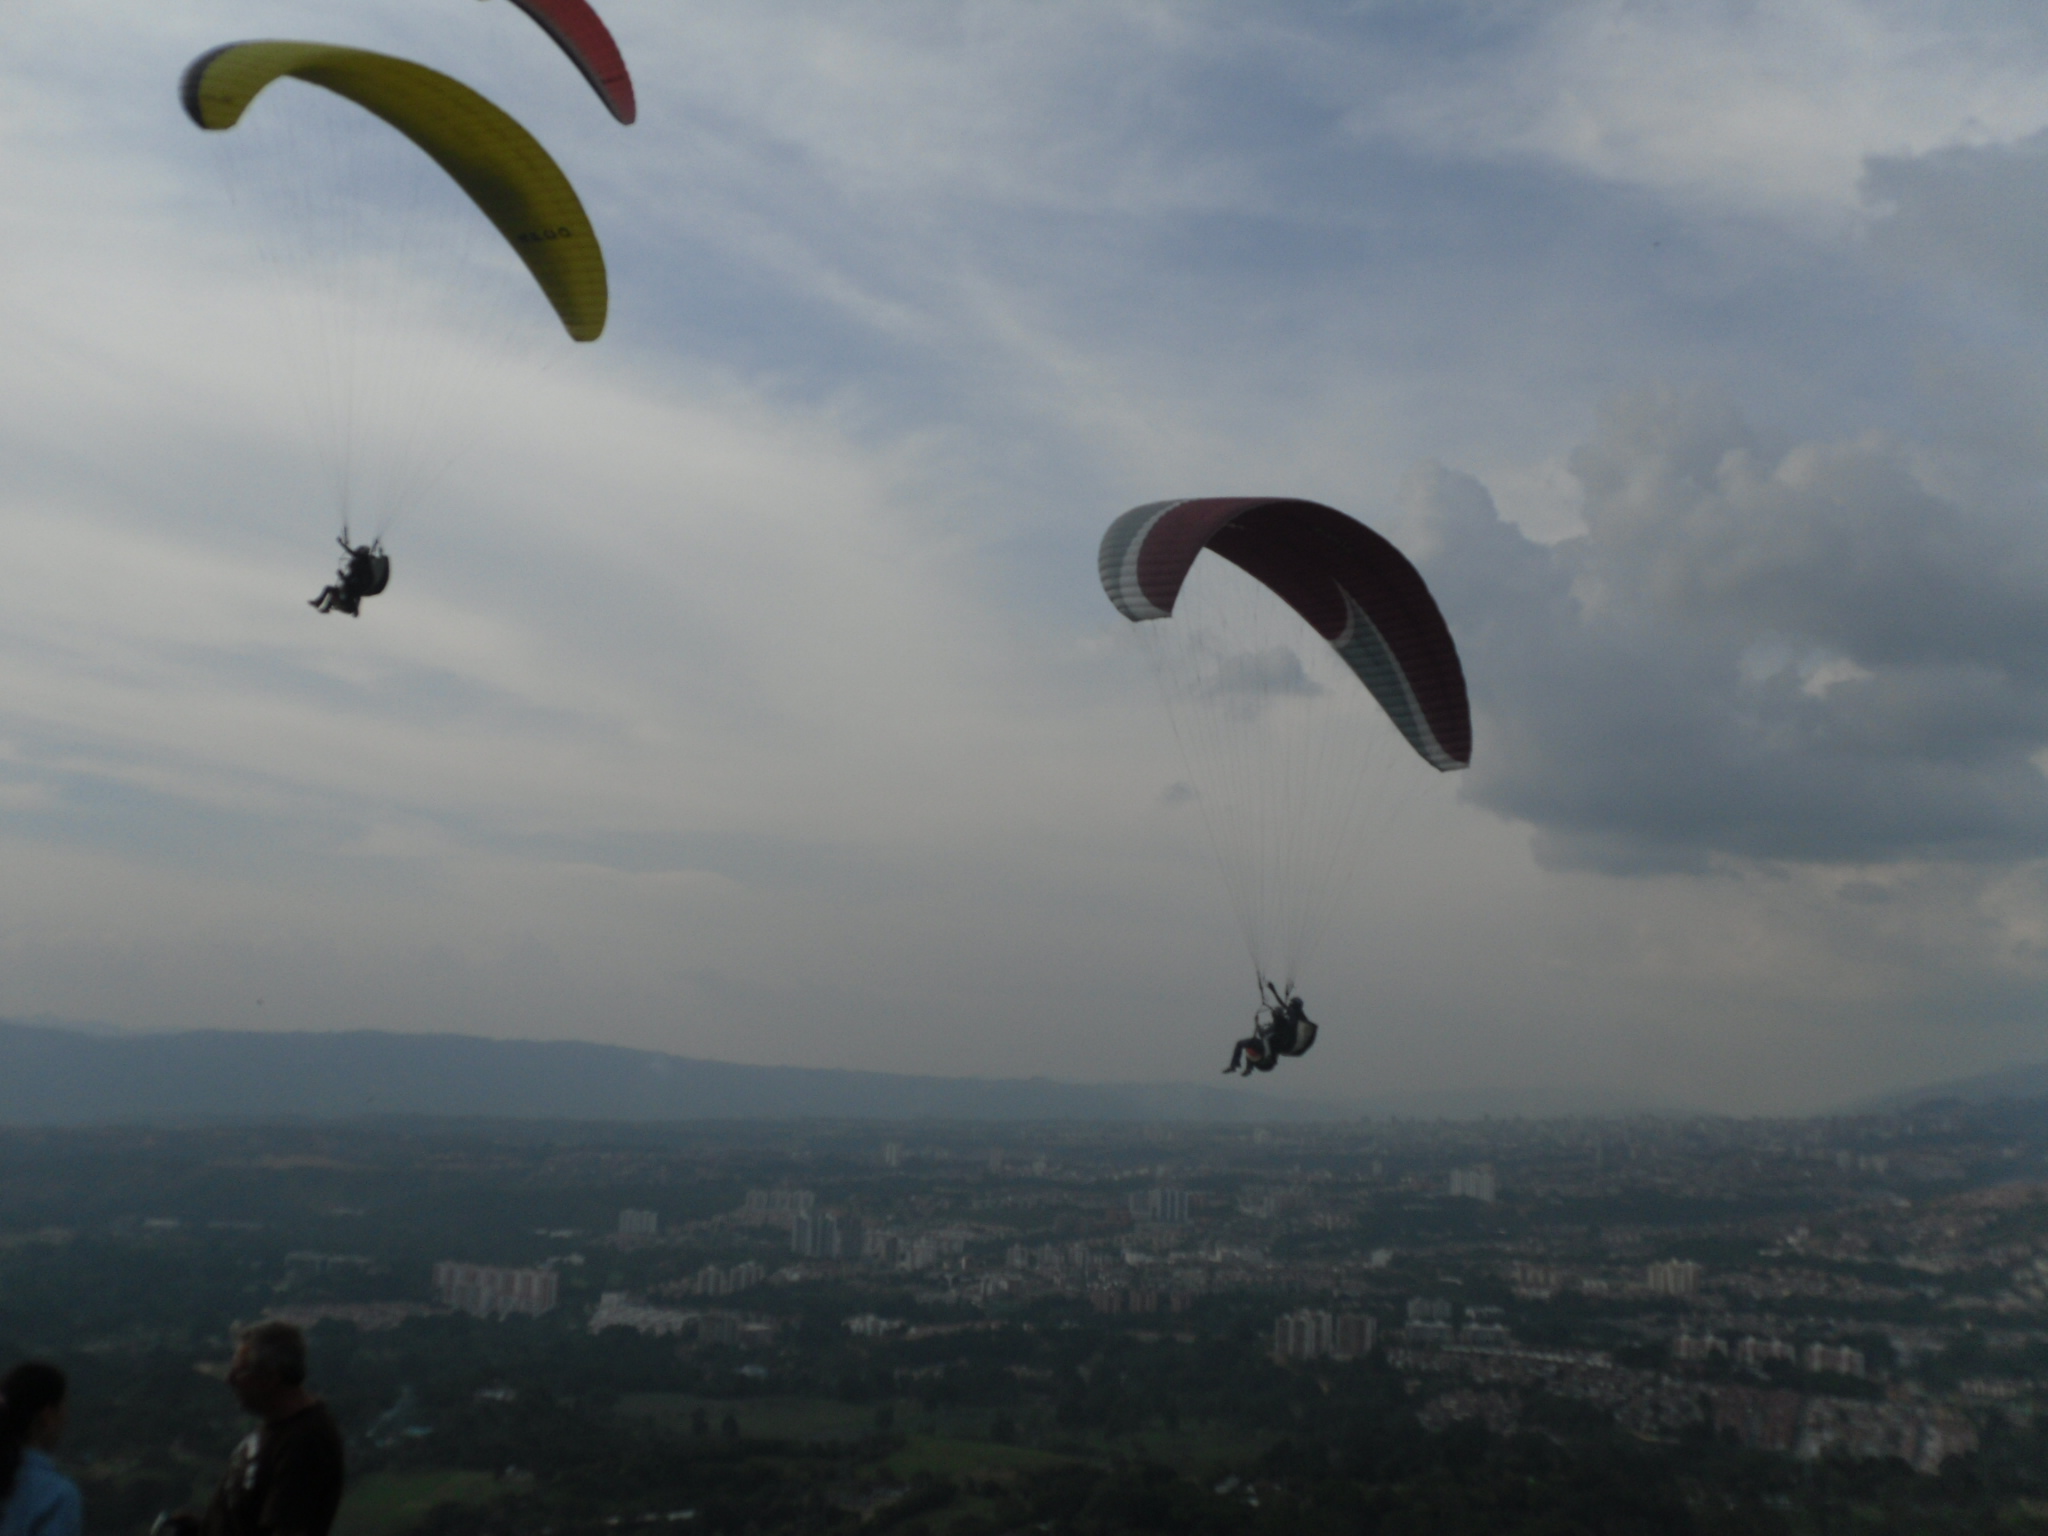 Adventure in Colombia-Paragliding near Bucaramanga